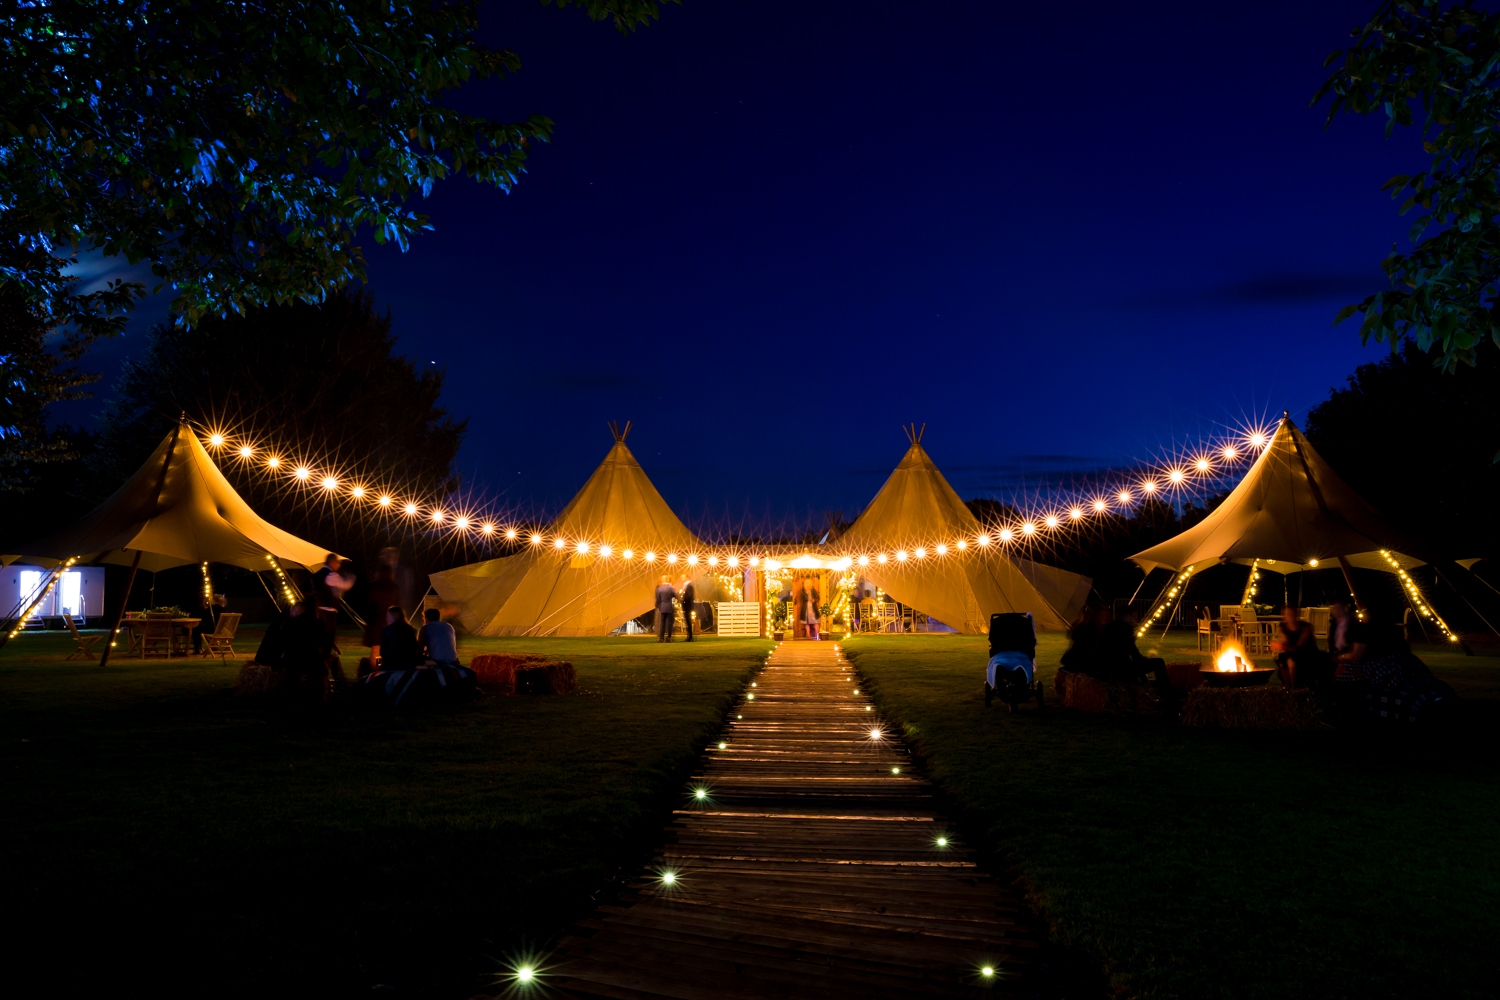 Tipi at night with glowing lights and fire